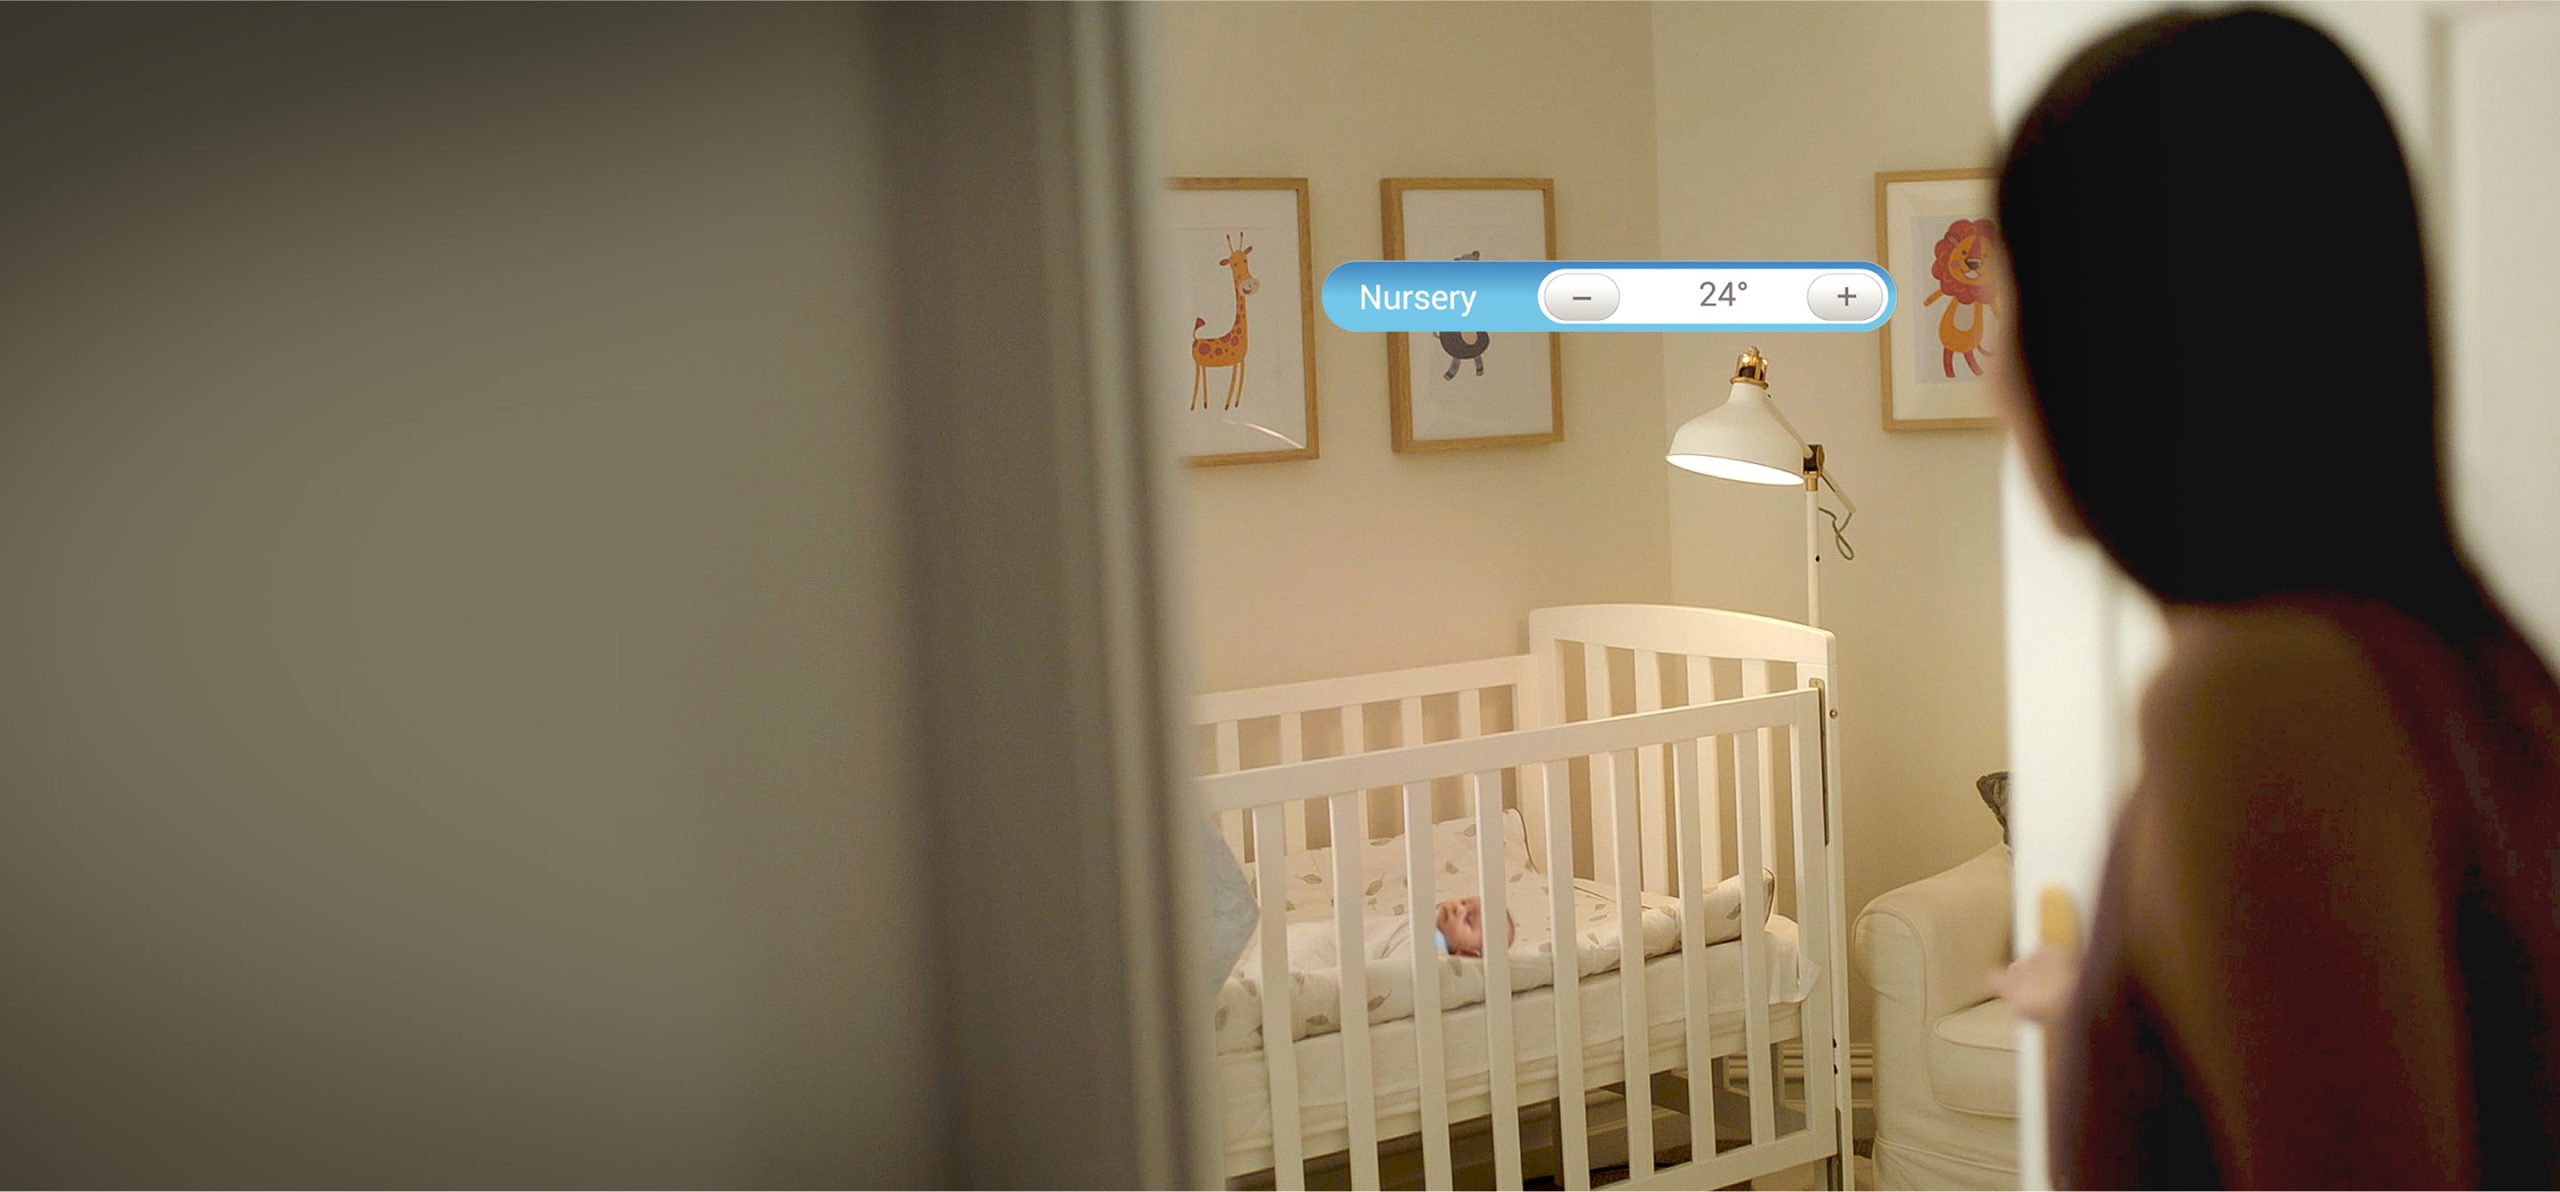 MyAir air conditioning smart home in babies room